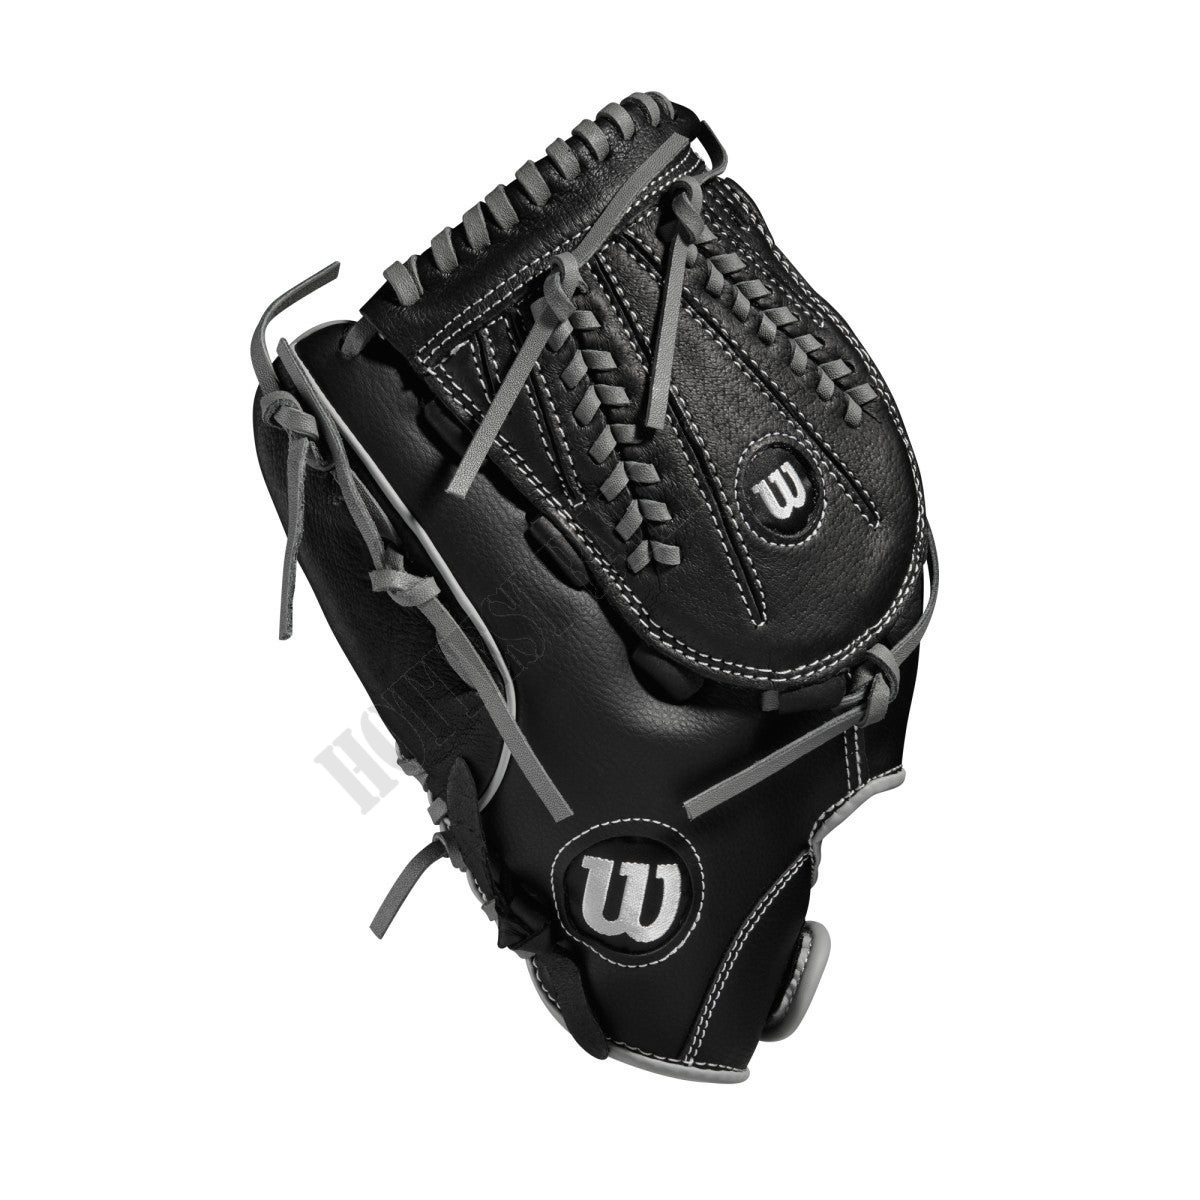 A360 13" Slowpitch Glove - Left Hand Throw ● Wilson Promotions - -3